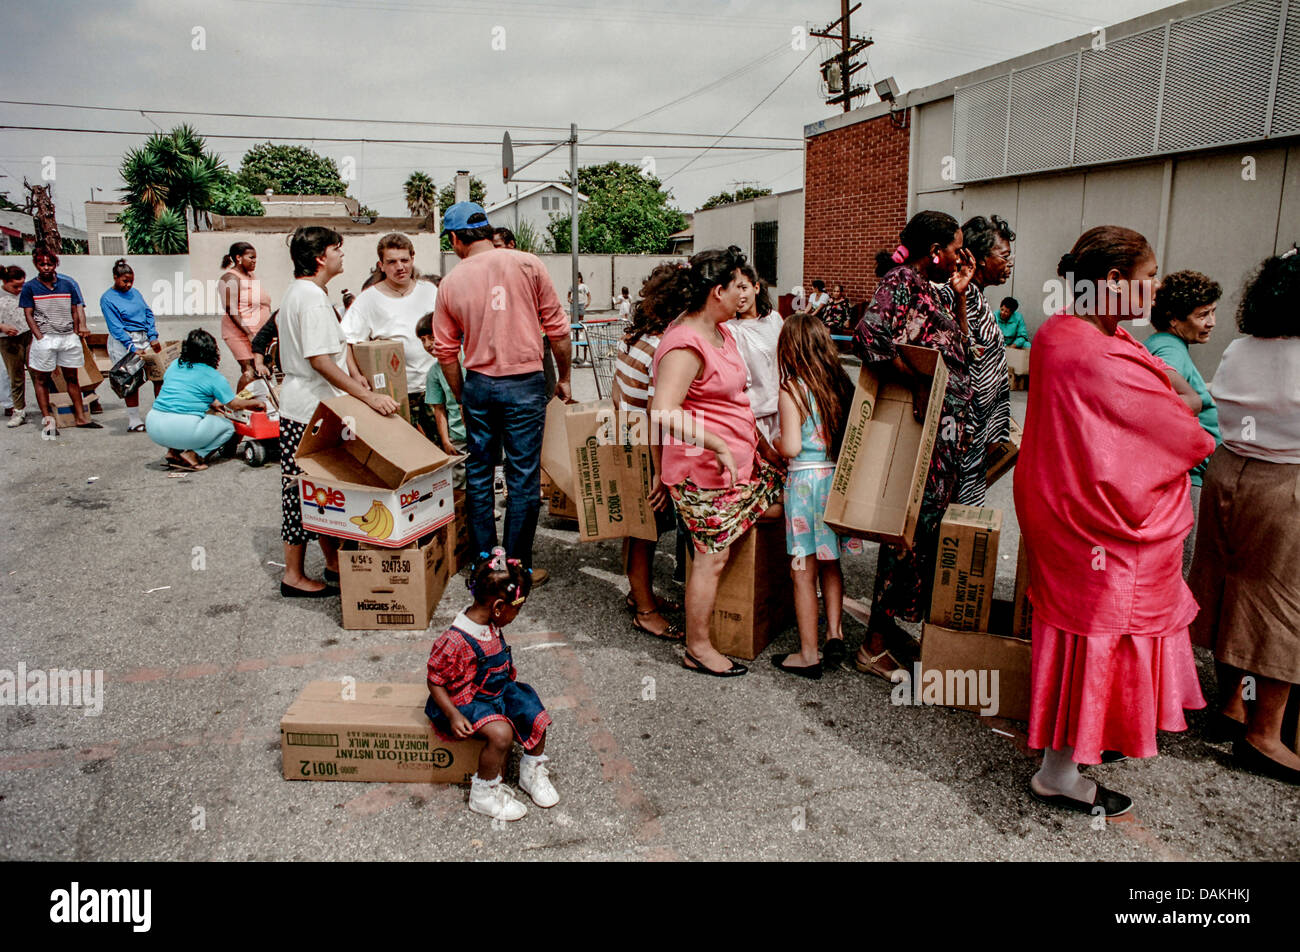 Hungry Hispanic and African American local LA residents line up for free charity food after the 1992 Rodney King race riots. Stock Photo